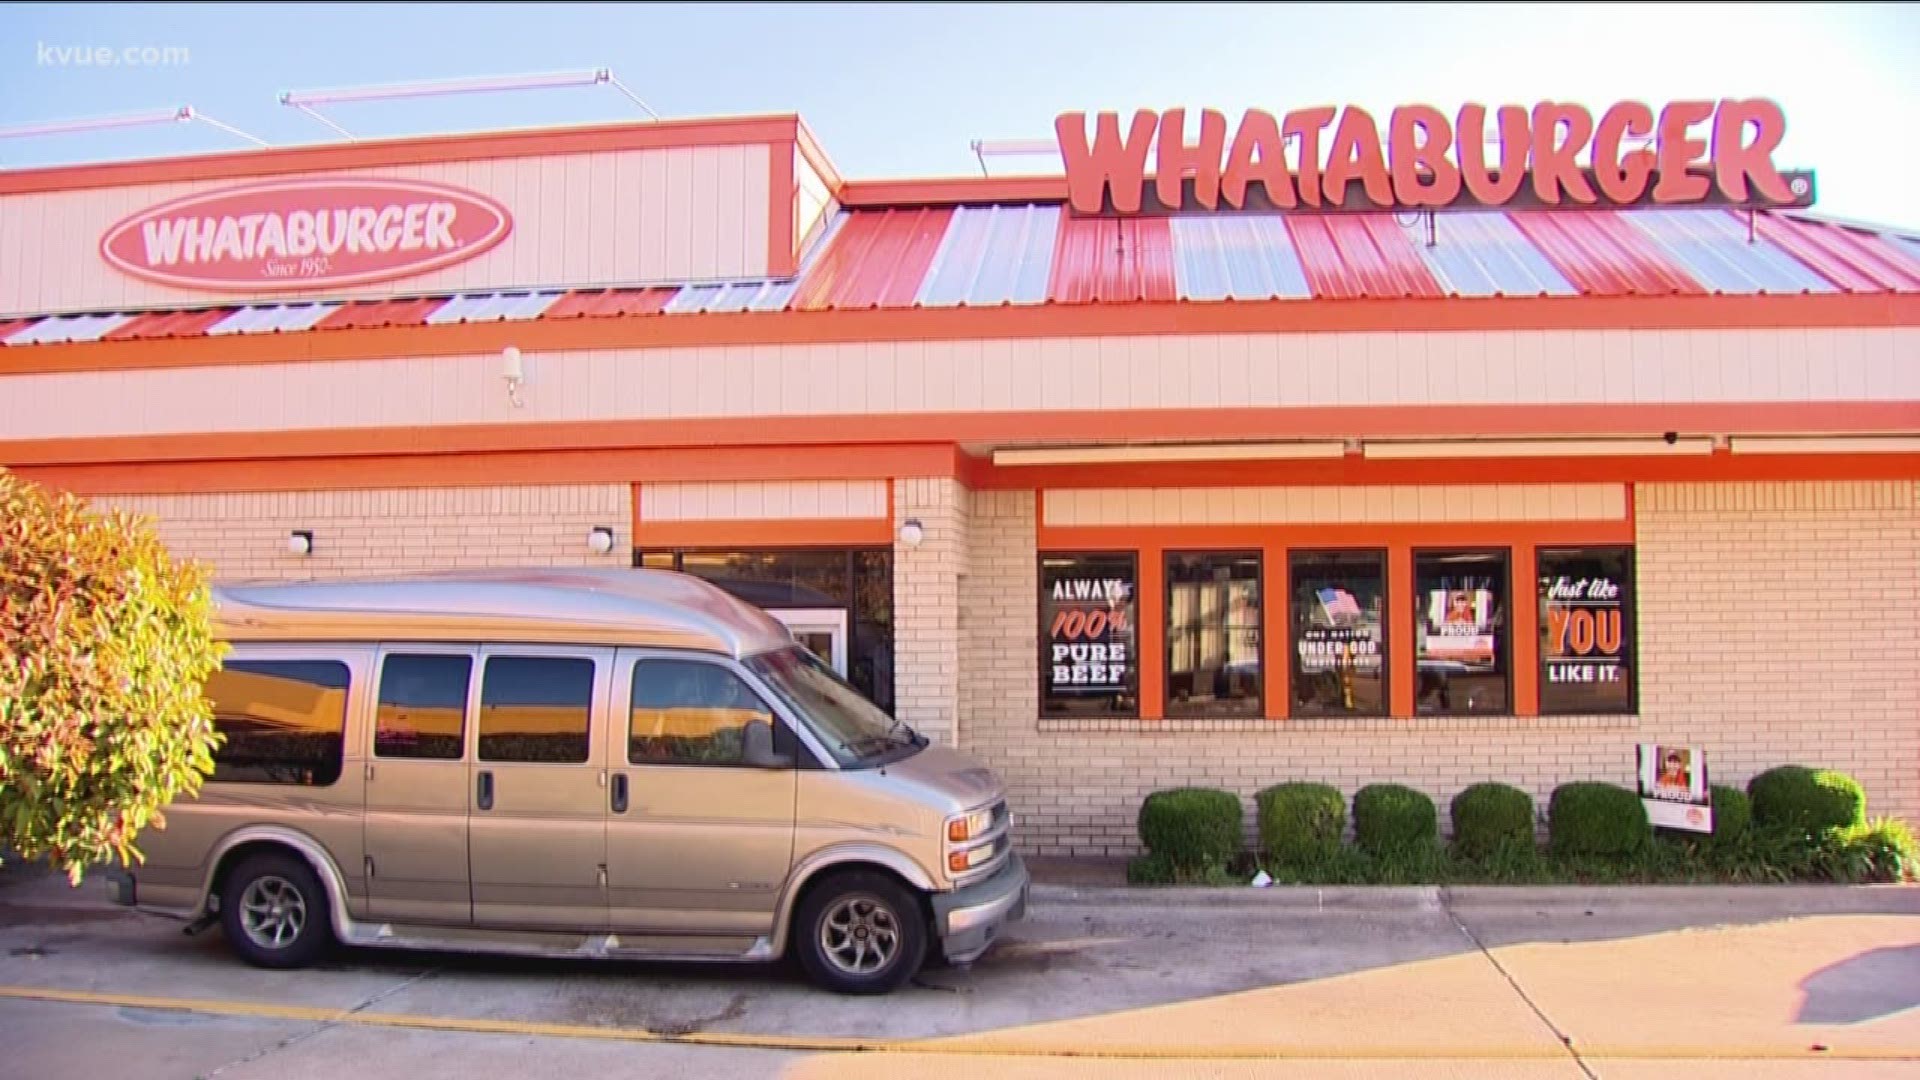 Whataburger announced Friday that it's selling to a Chicago-based company that will help the chain expand.